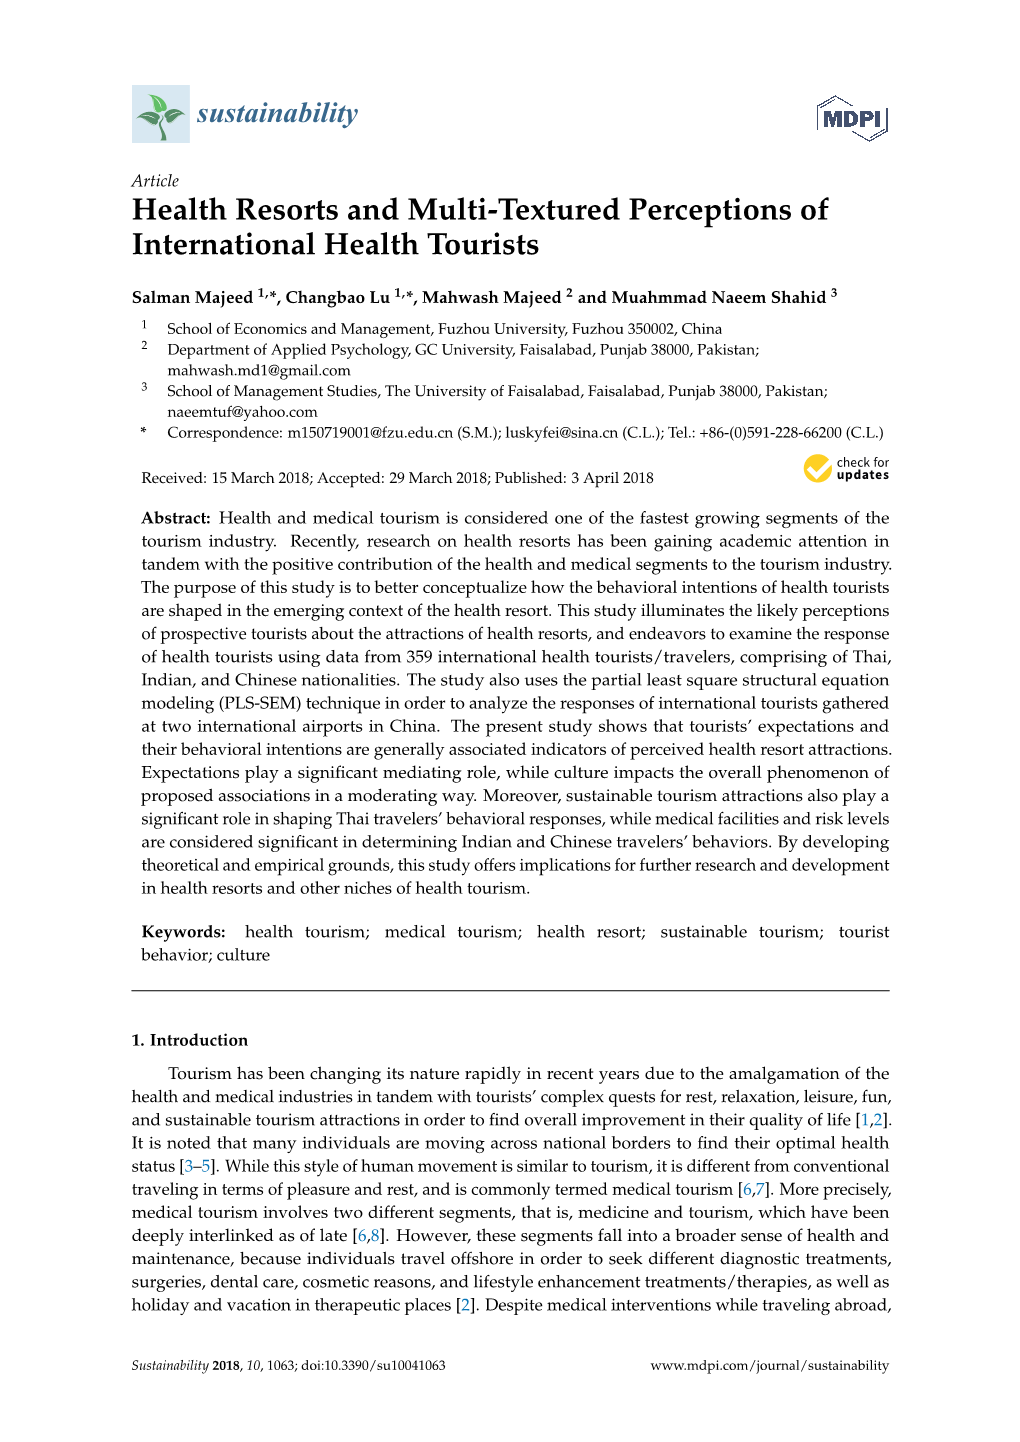 Health Resorts and Multi-Textured Perceptions of International Health Tourists